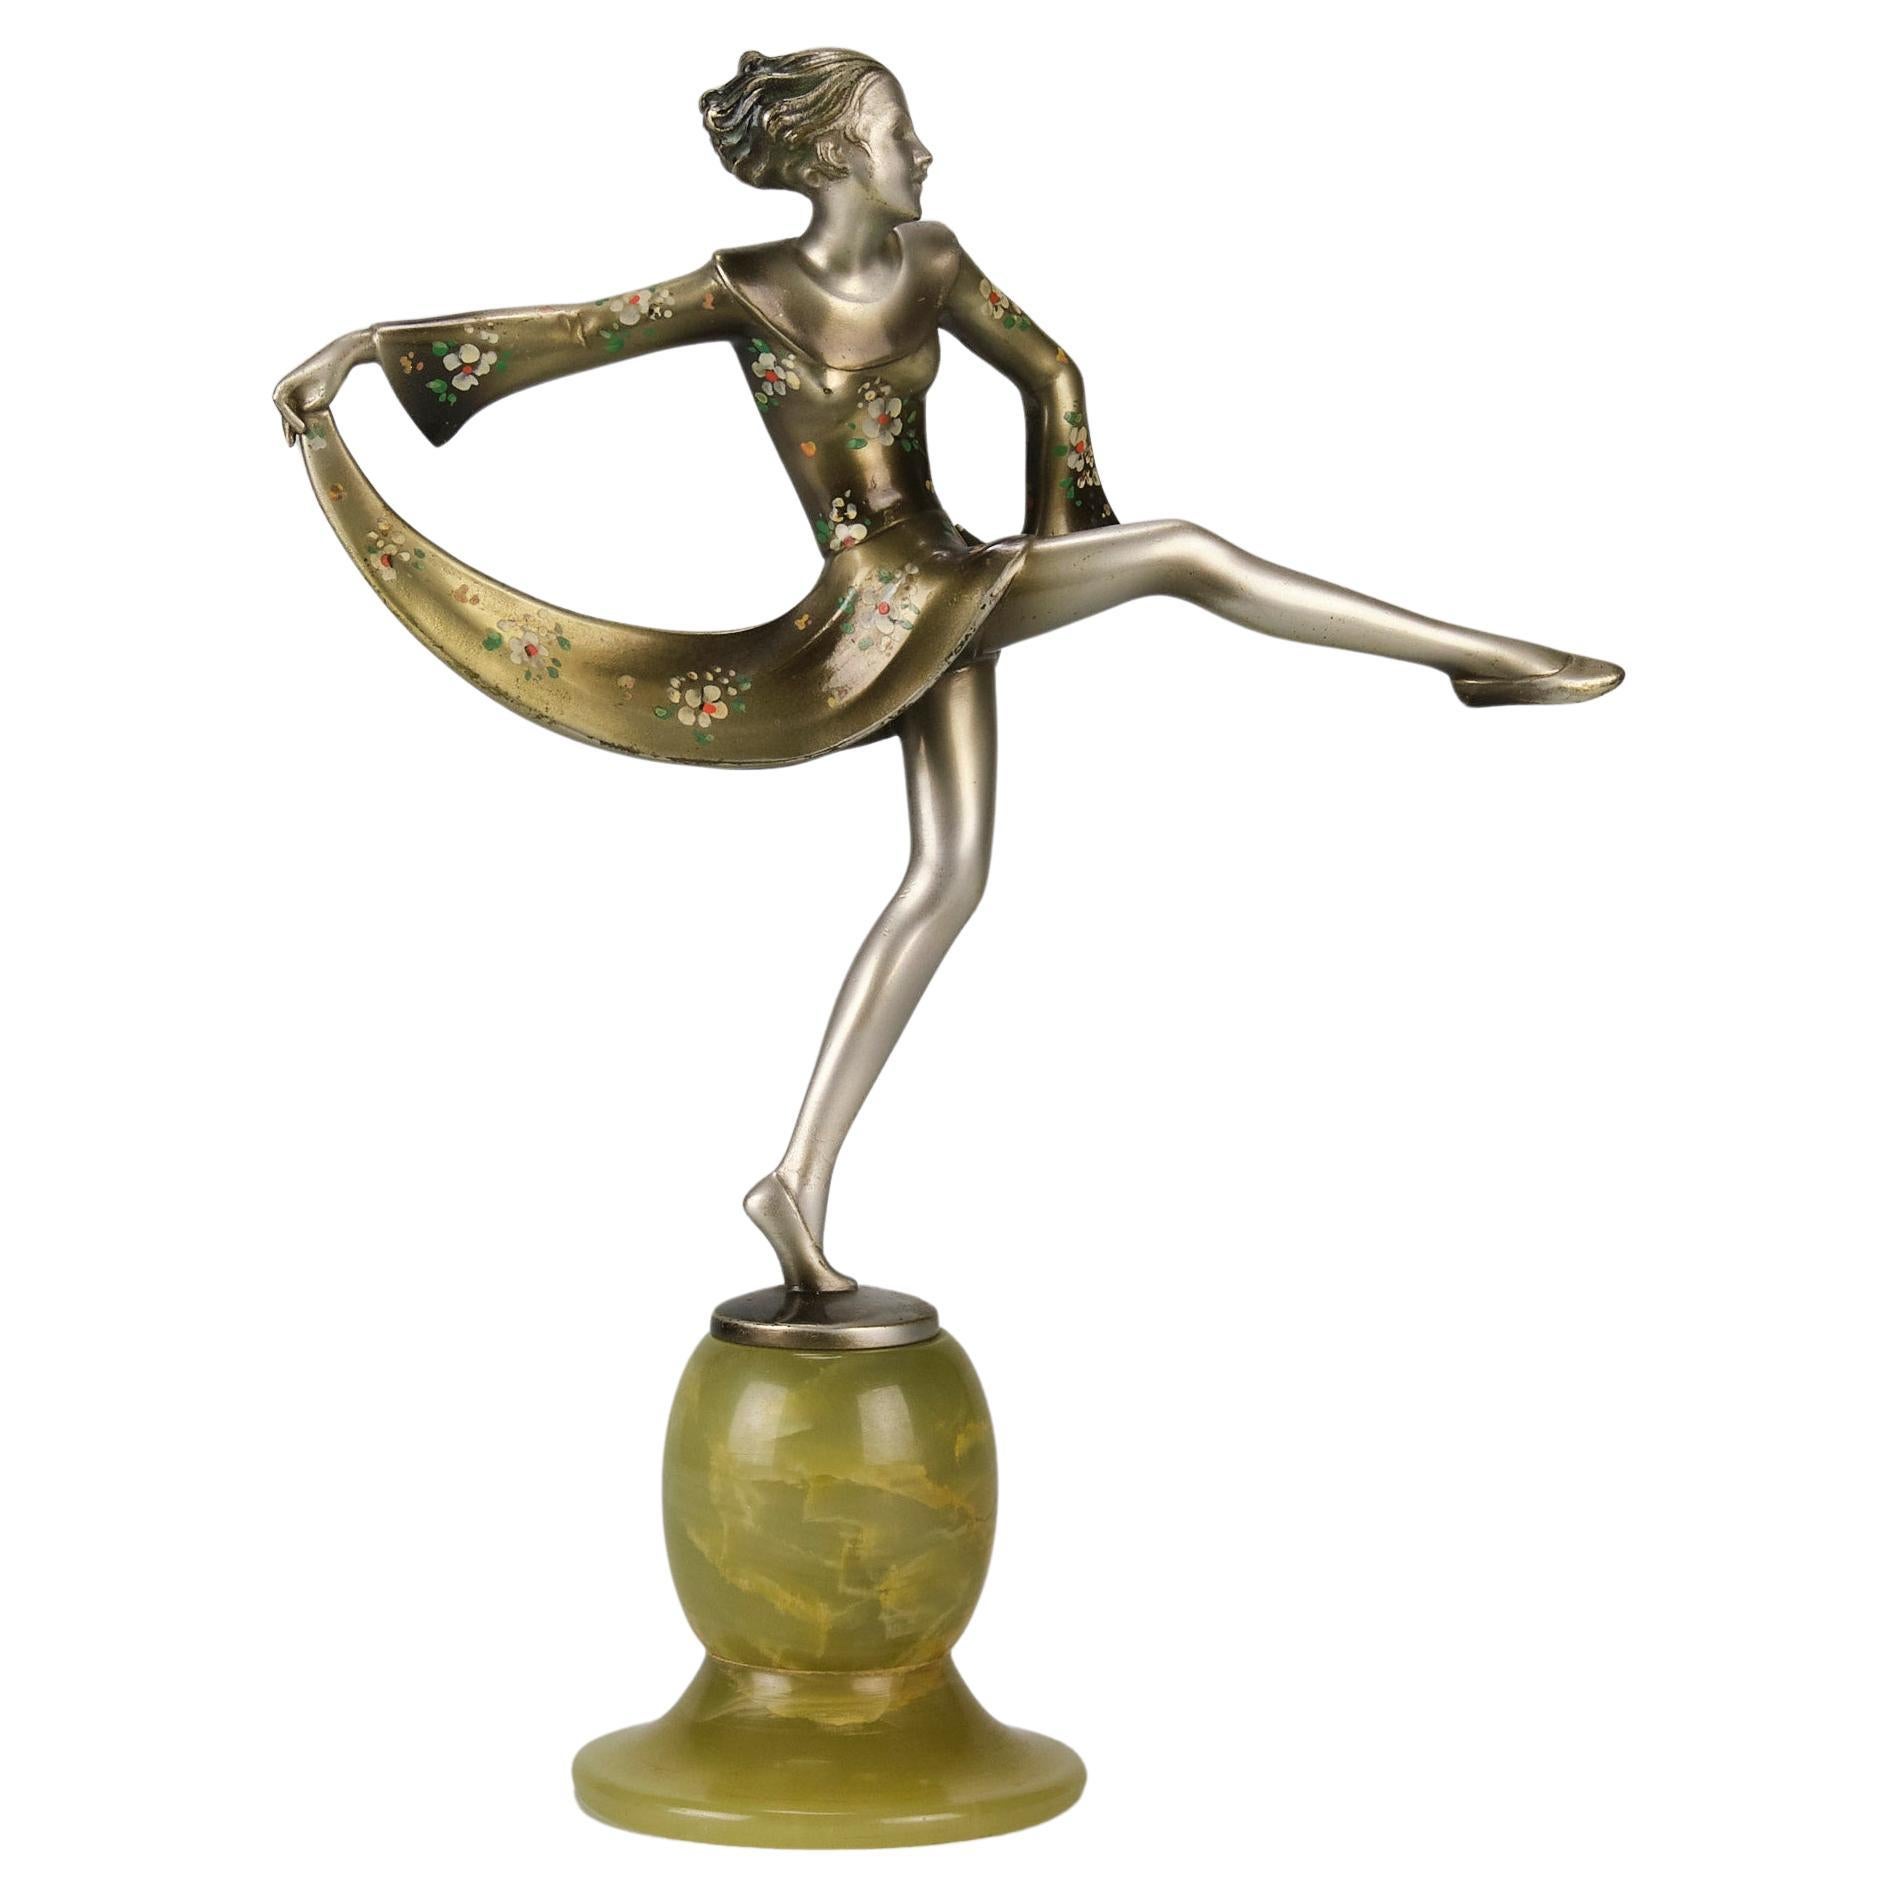 Early 20th Century Art Deco Cold-Painted Bronze "Amelie" by Lorenzl & Crejo For Sale